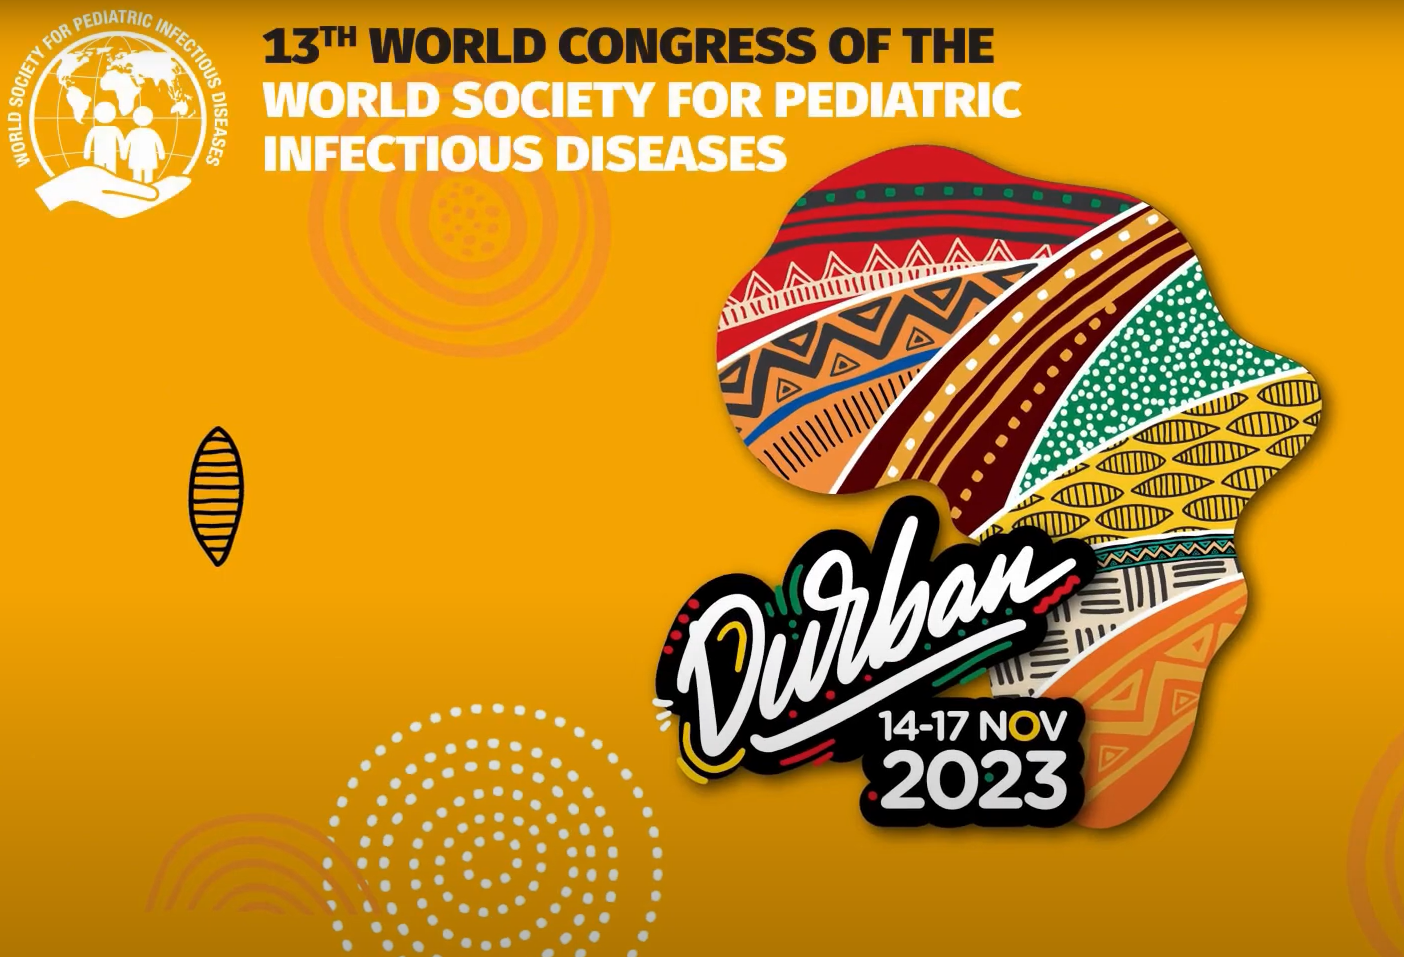 PHAN CHAU TRINH UNIVERSITY PARTICIPATED IN THE 13TH WORLD CONGRESS OF THE WORLD SOCIETY FOR PEDIATRIC INFECTIOUS DISEASES (WSPID 2023) – SOUTH AFRICA